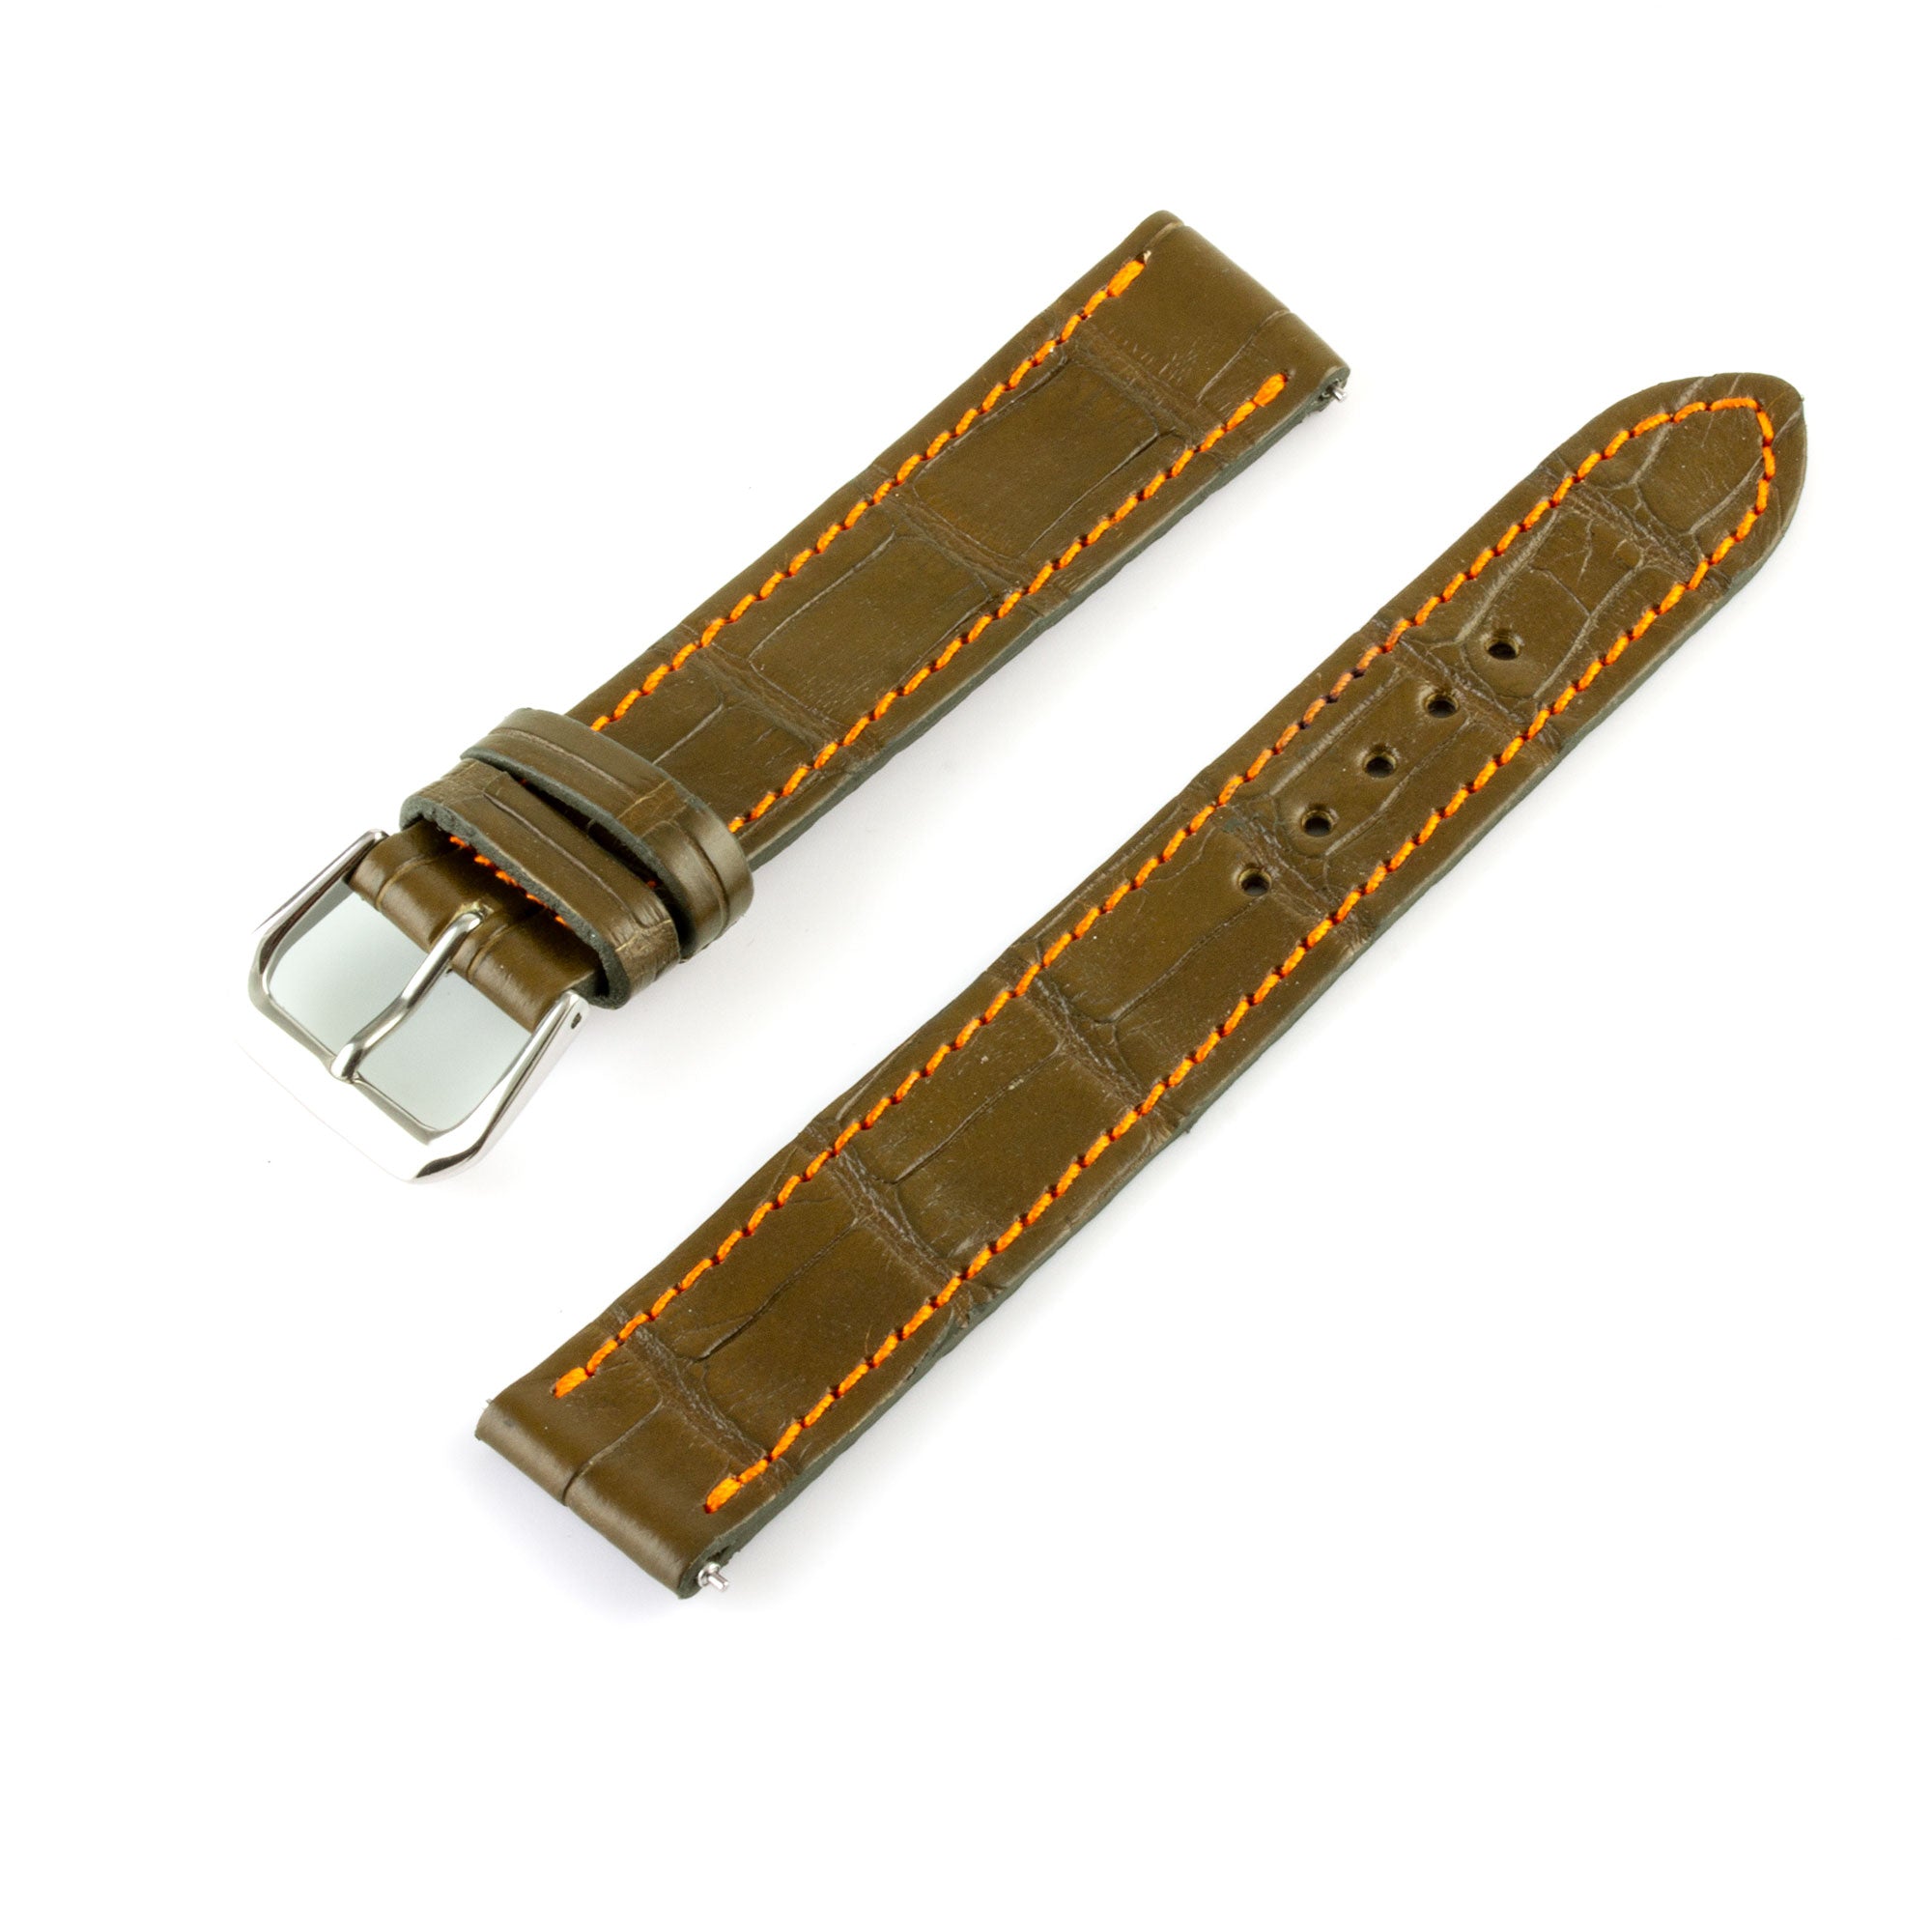 Alligator "Solo" leather watch band - 17mm width (0.67 inches) / Size M (n° 7)